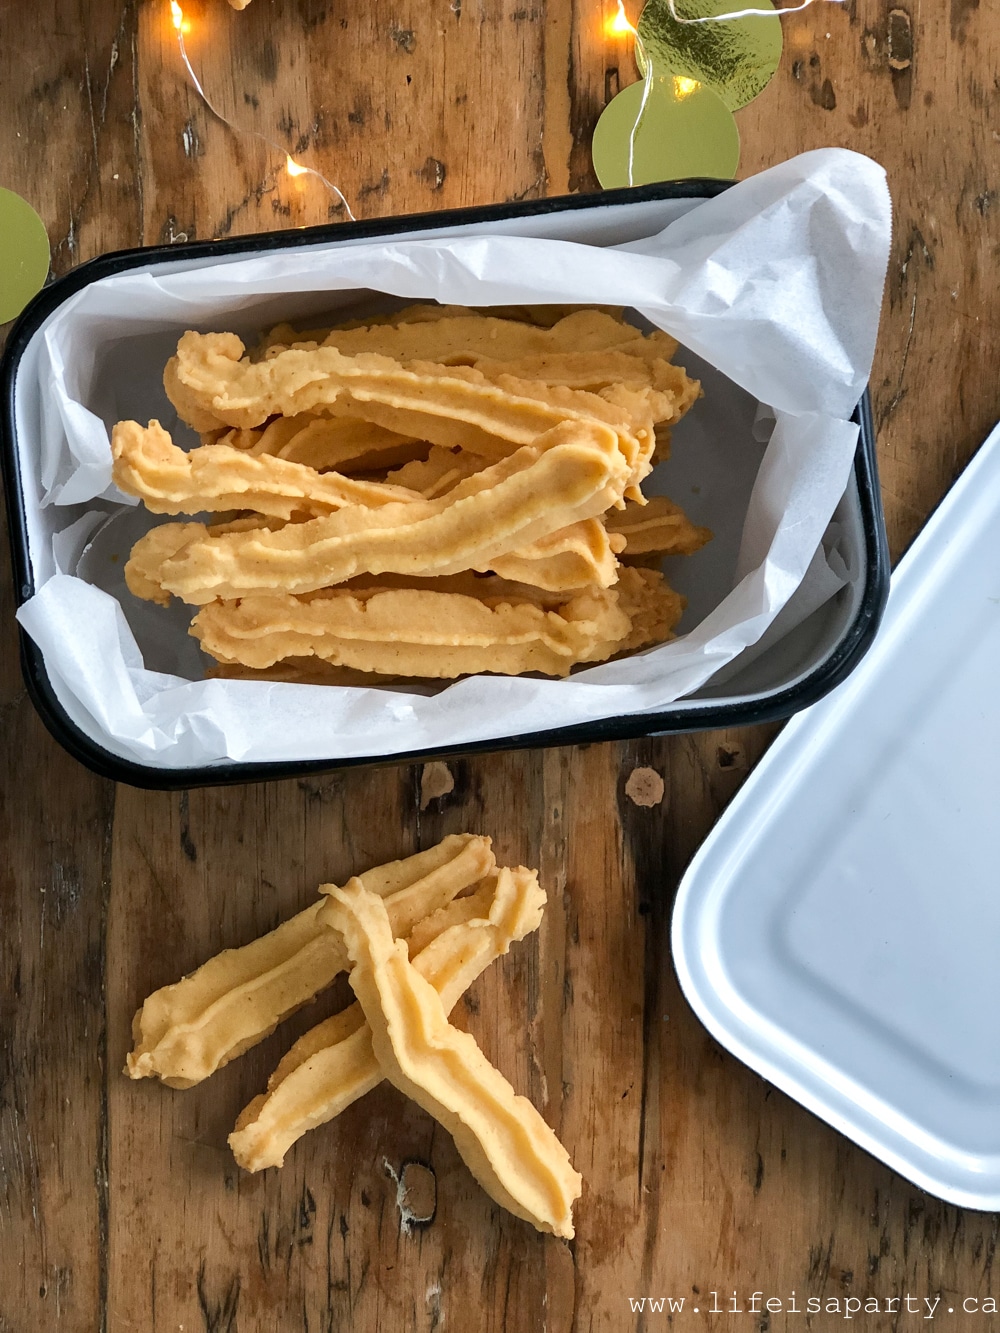 Cheese Straws Recipe: spicy and savoury cheese shortbread straws, perfect for gift giving or as part of a charcuterie board.